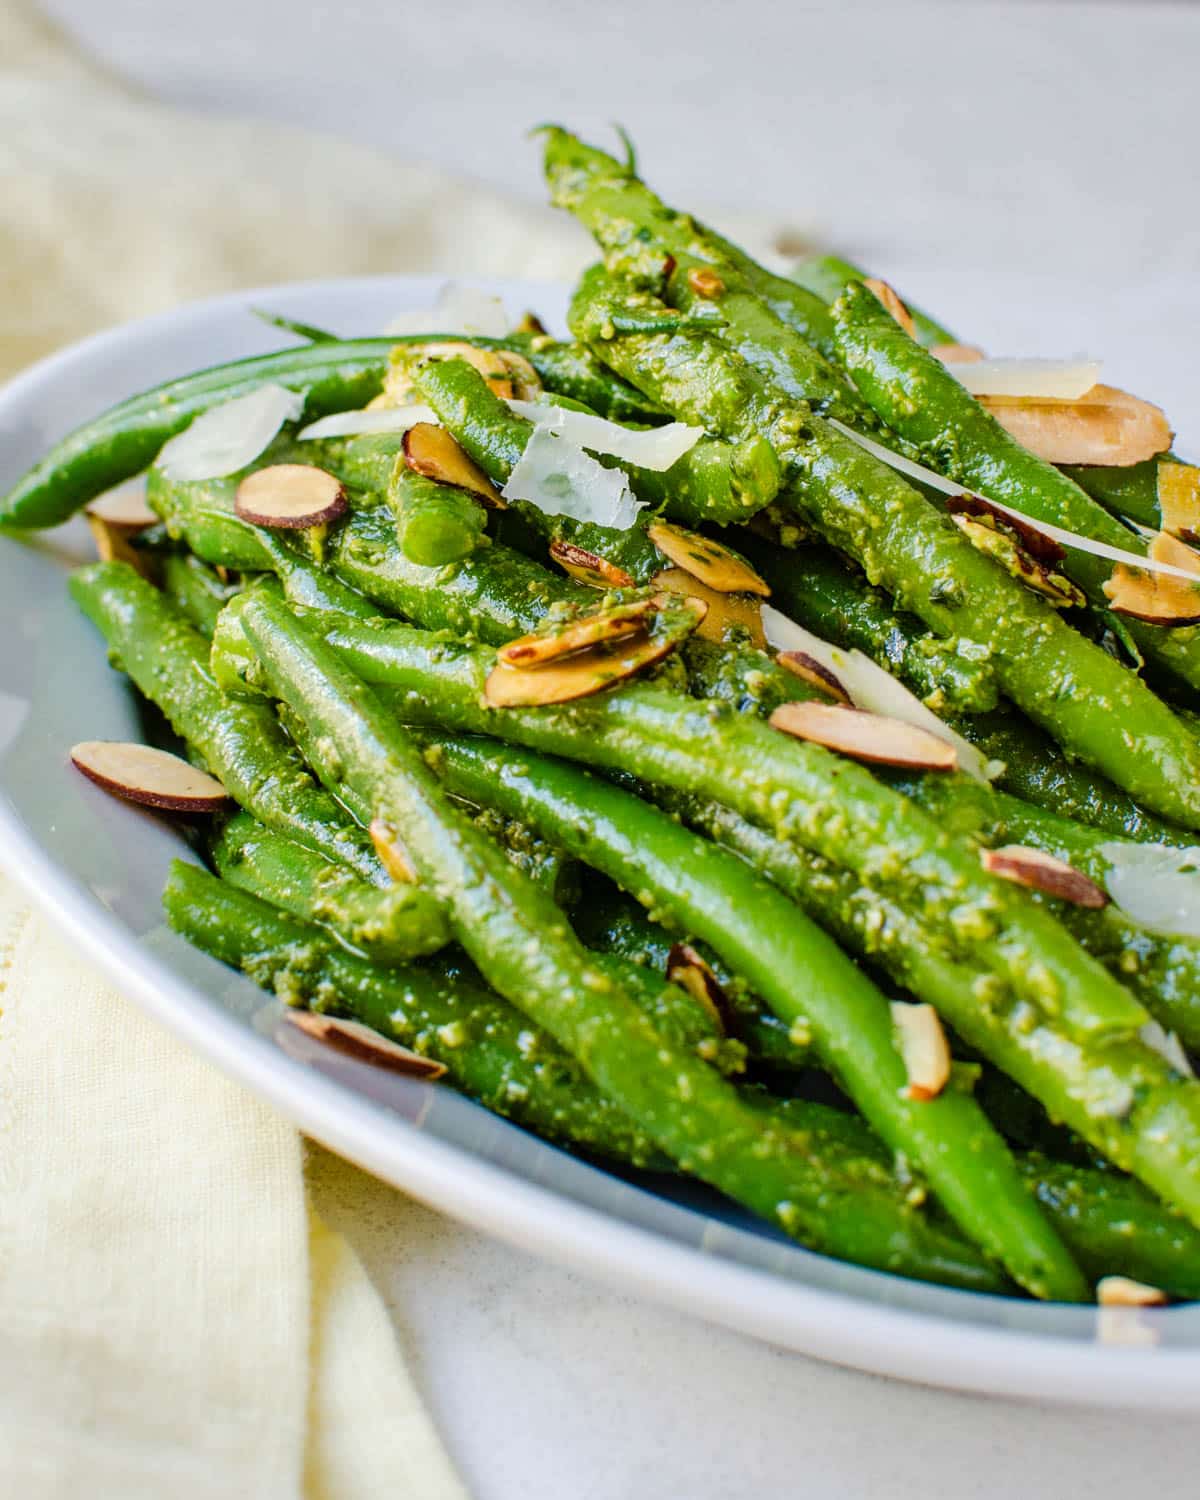 A plate of Italian beans.